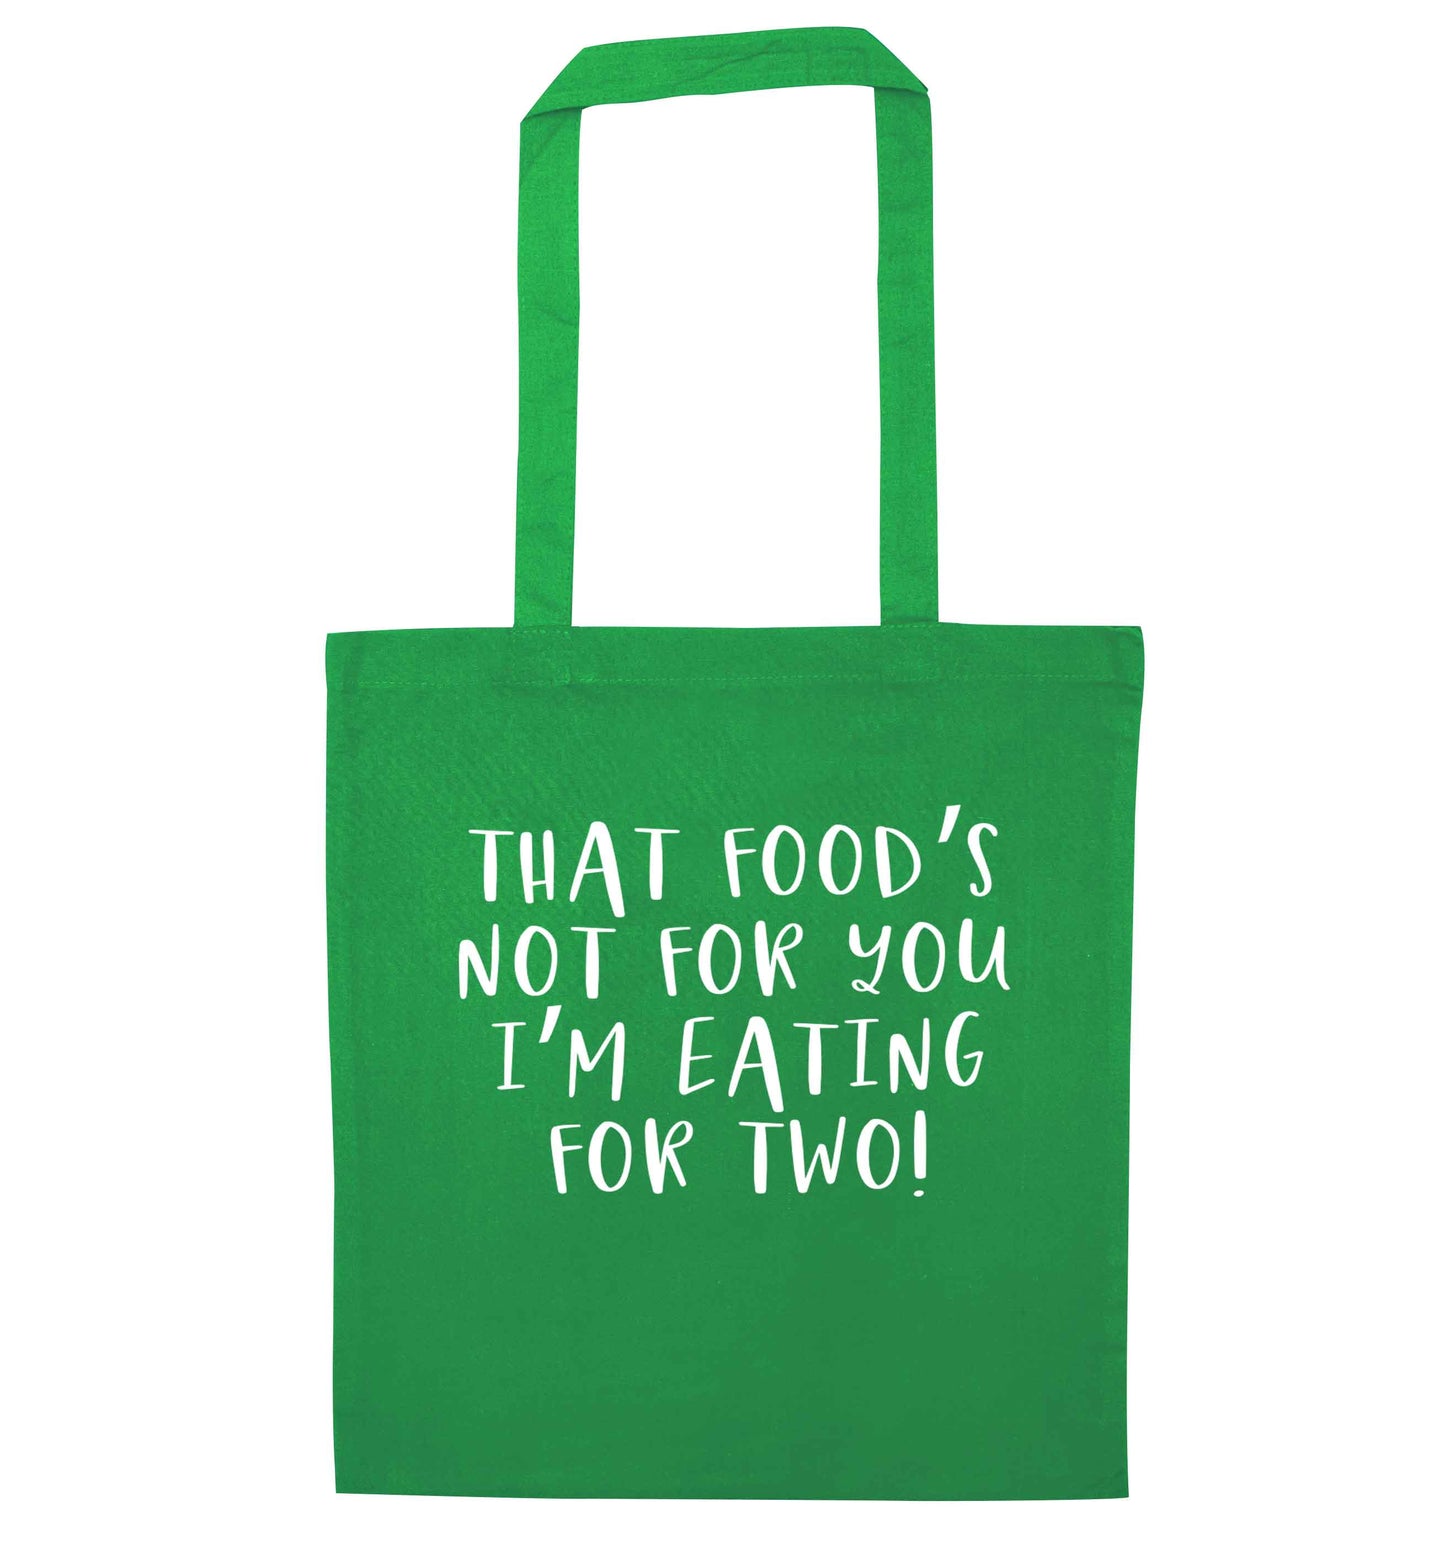 That food's not for you I'm eating for two green tote bag